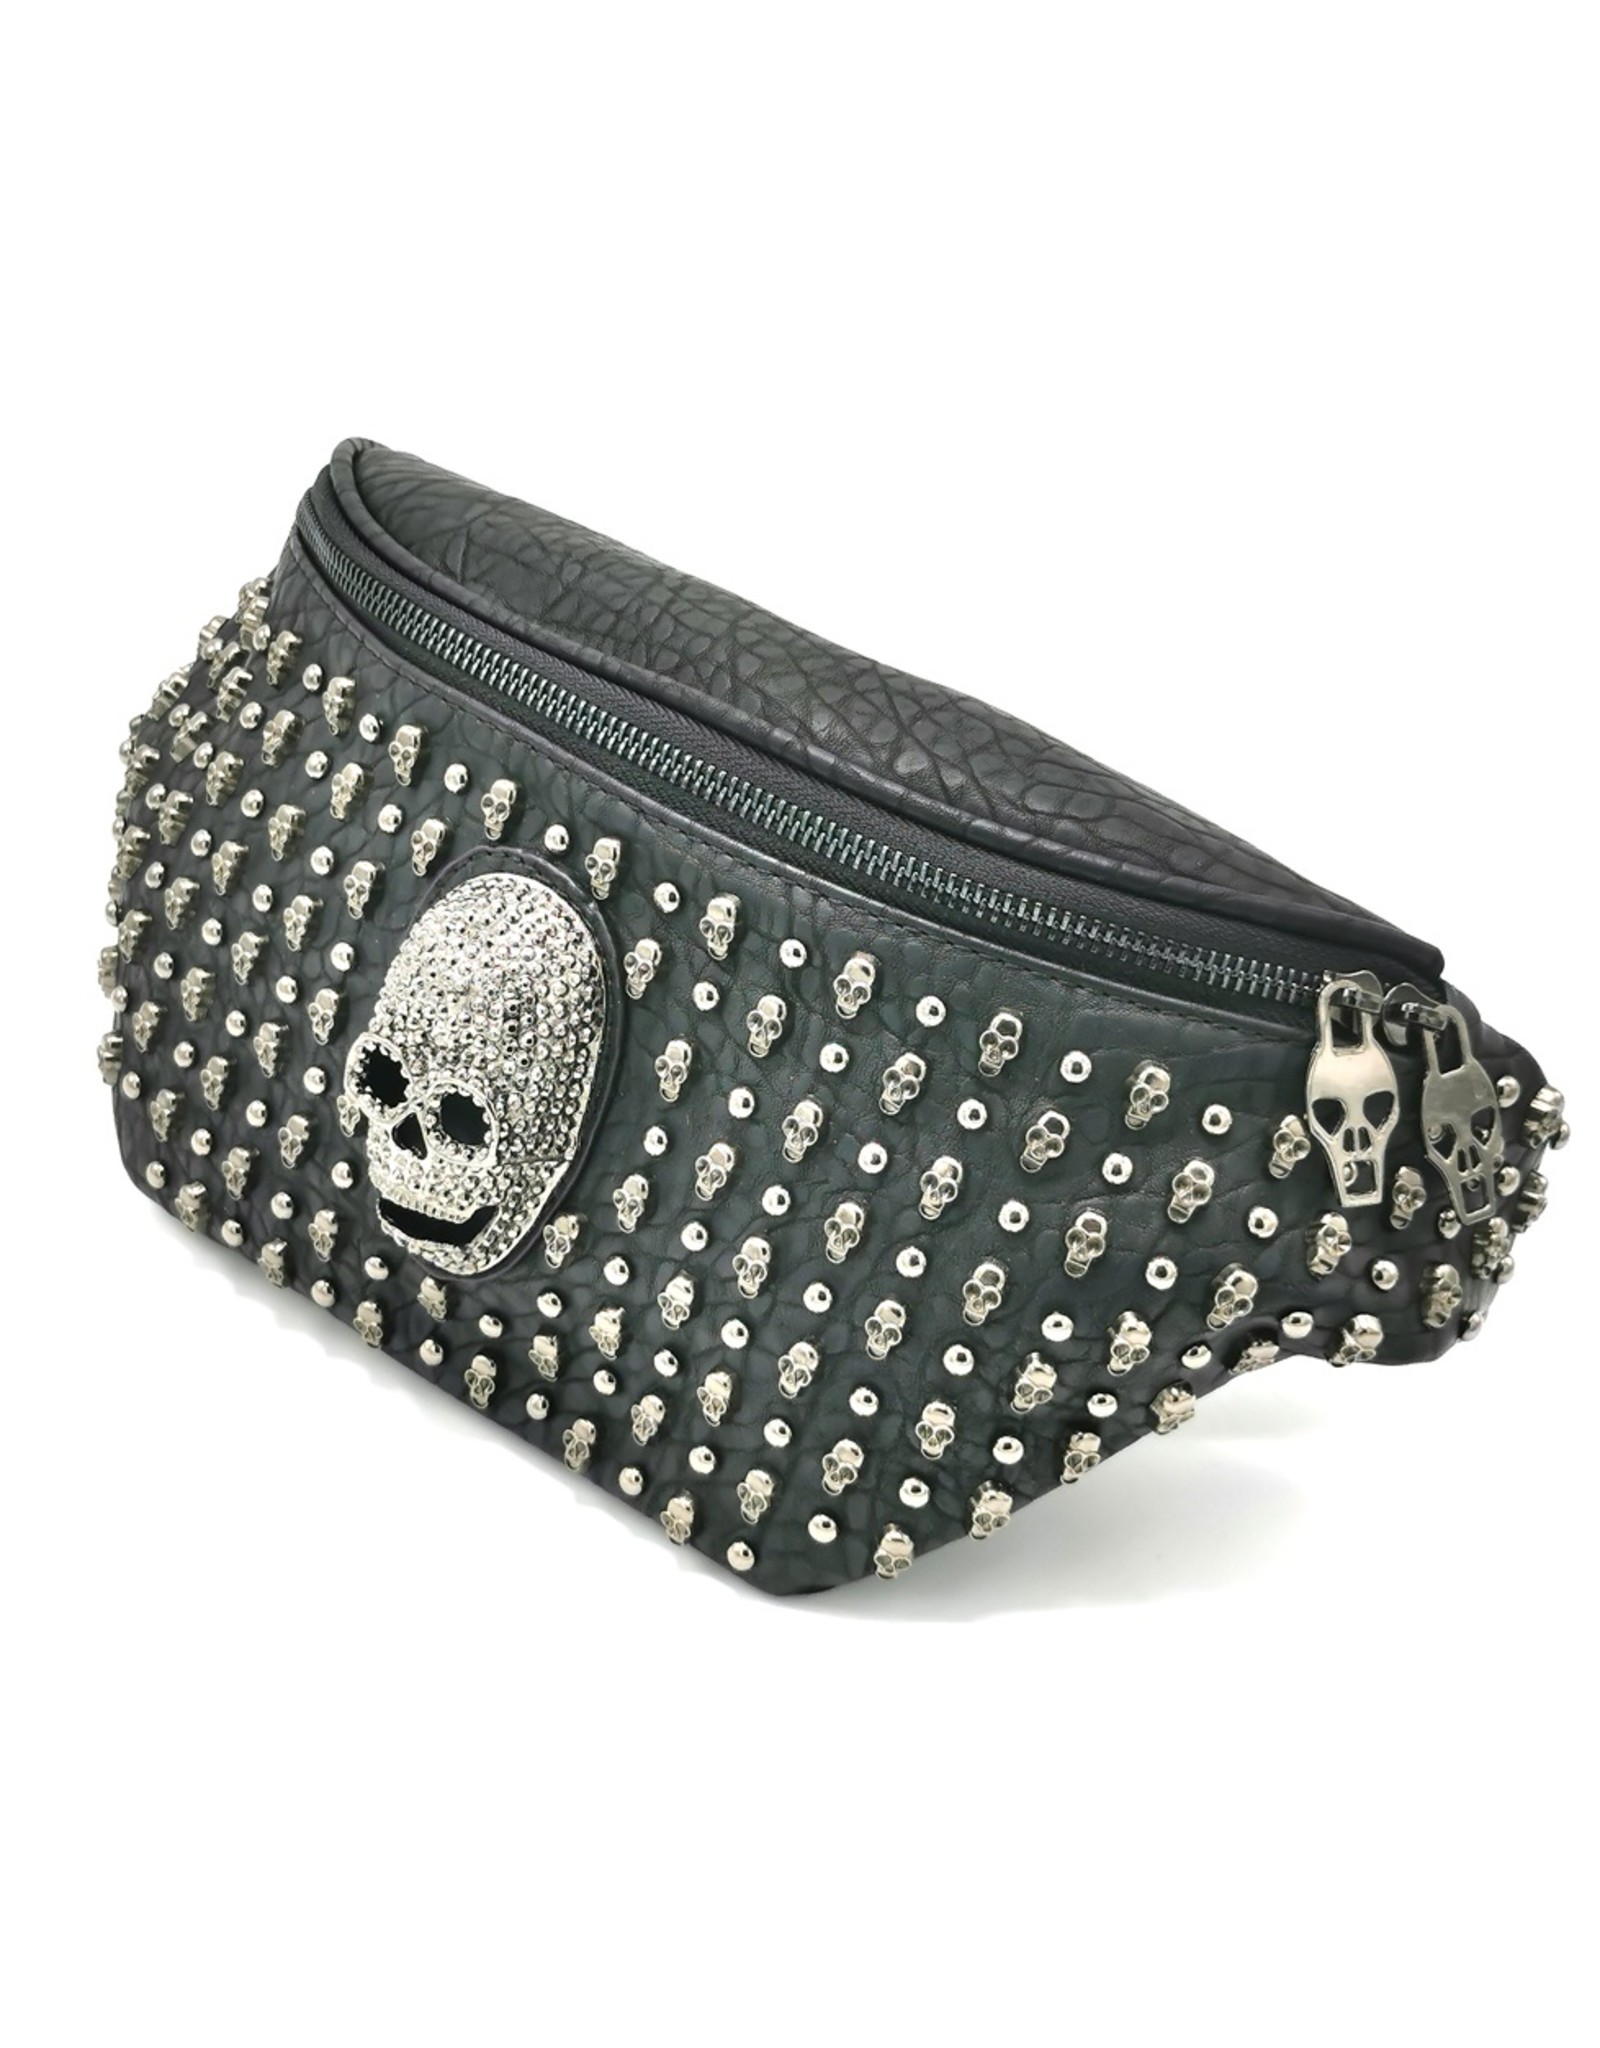 Dark Desire Gothic bags Steampunk bags - Gothic Fanny Bag with Metal Skulls